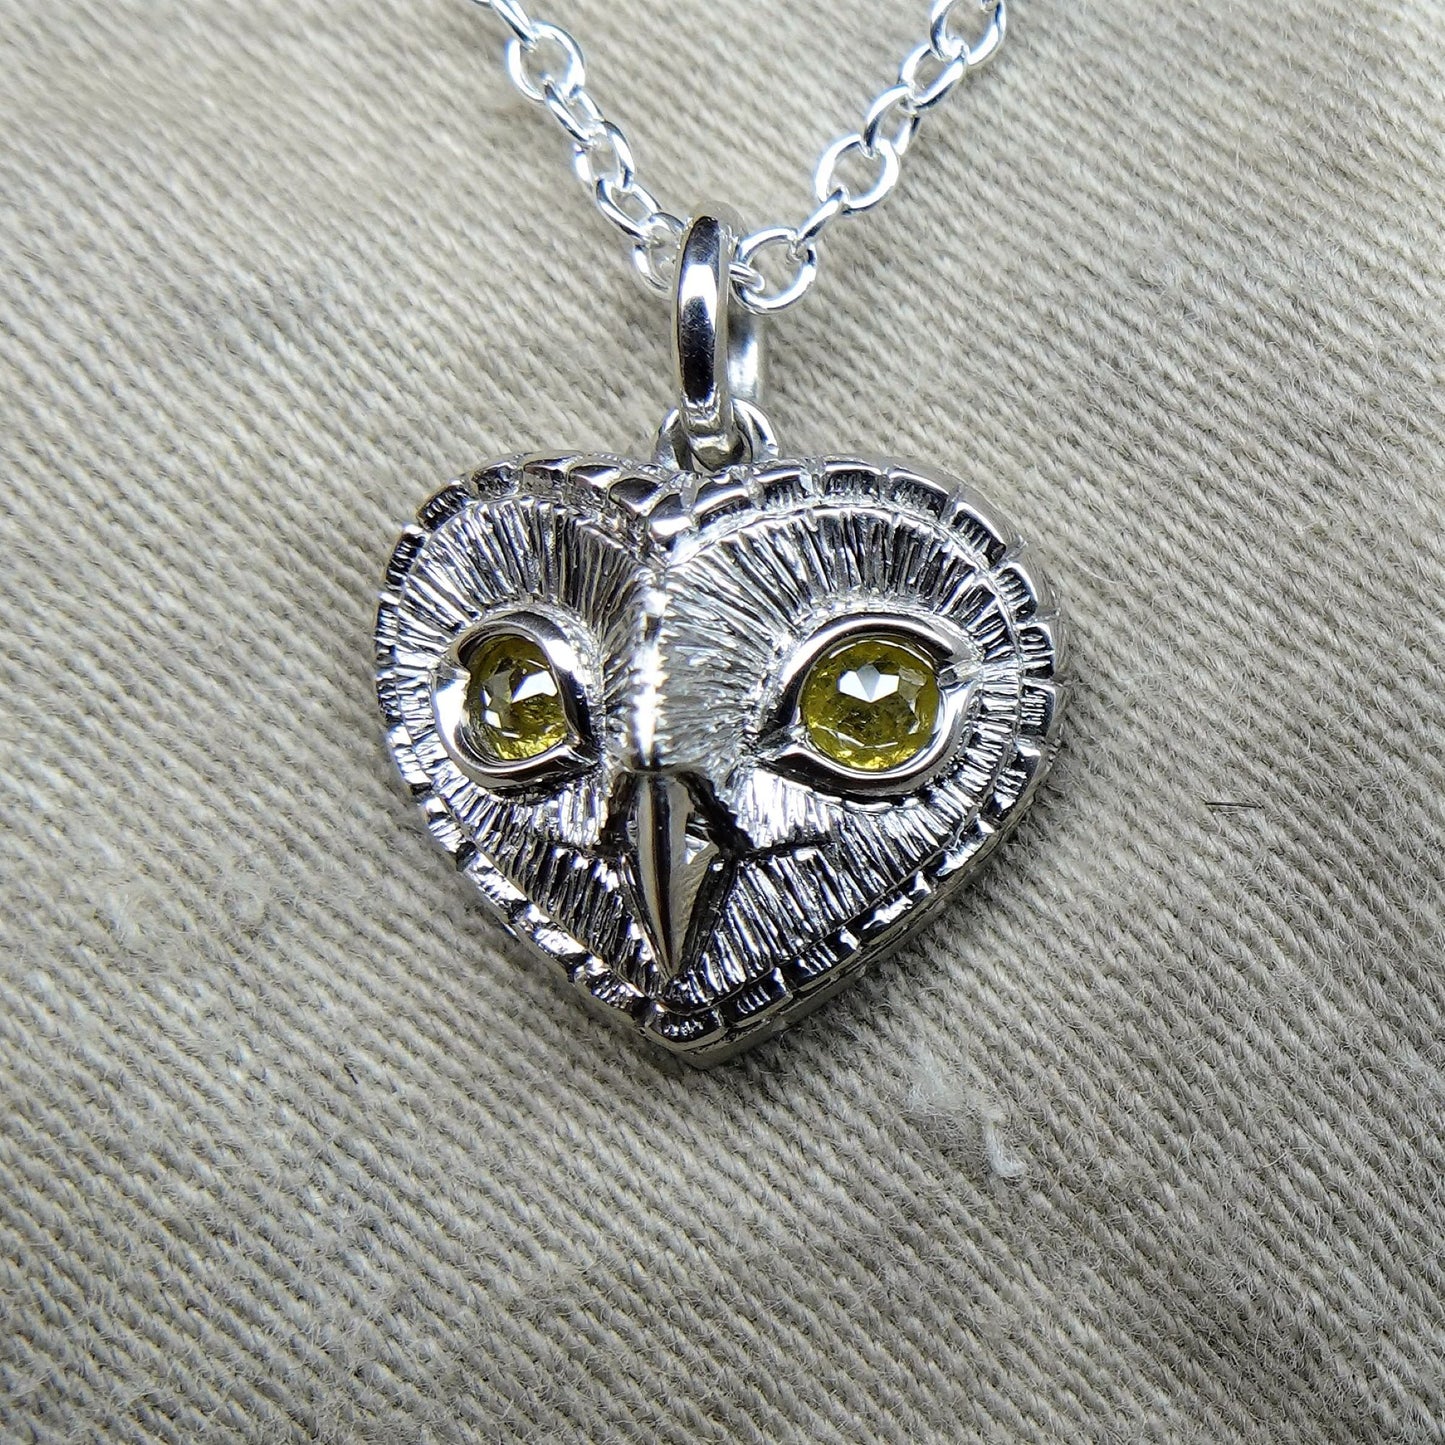 Diamond owl necklace. Platinum coated sterling silver owl pendant with natural, diamond eyes *This piece is ready to be shipped* © Adrian Ashley